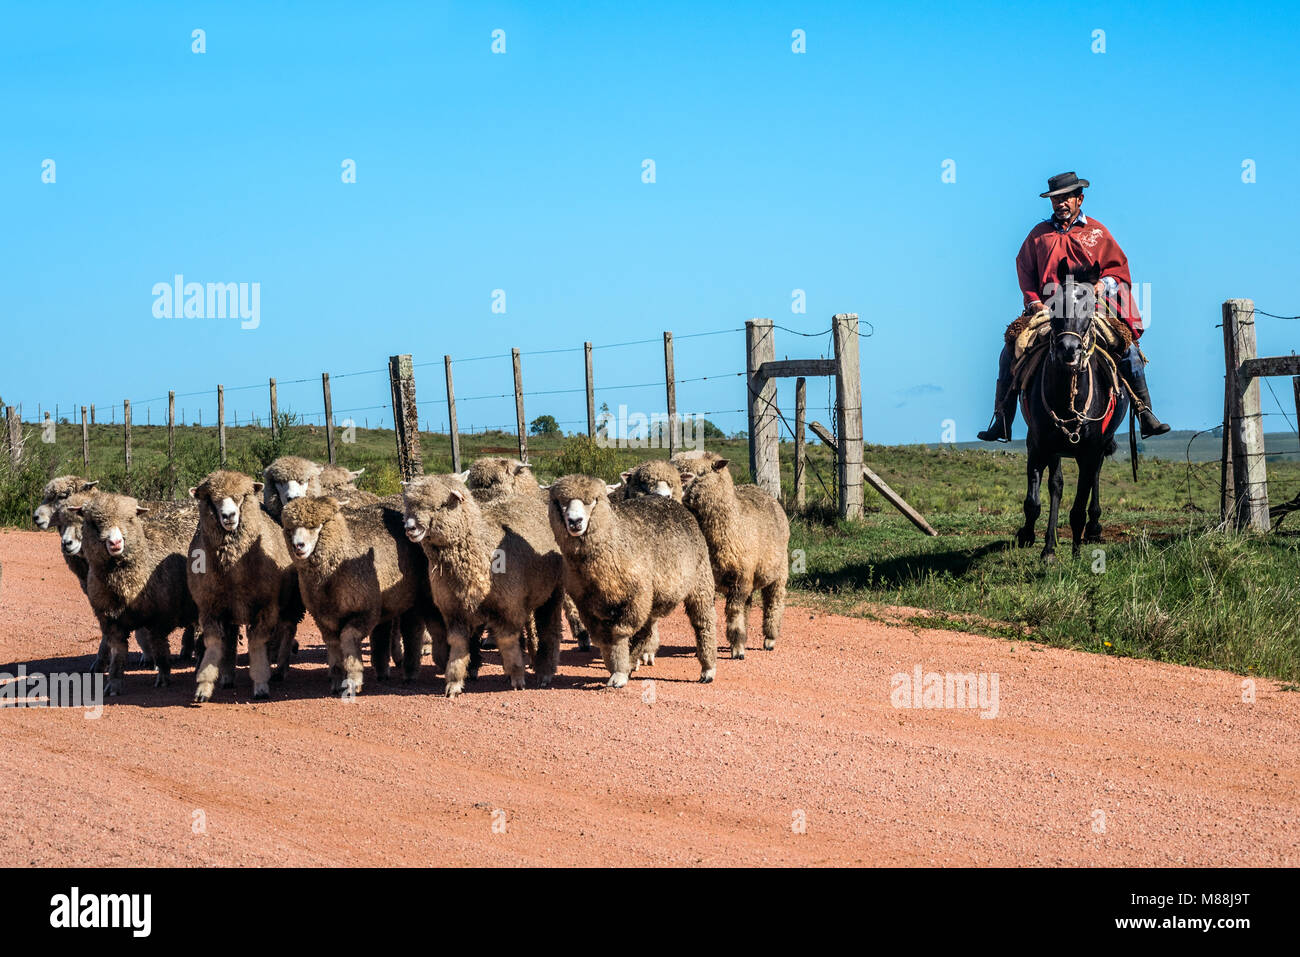 Cuchilla del Ombu, Tacuarembo, Uruguay - March 12, 2018: Gaucho (South American cowboy) collect the herd and drive it into the corral. Gaucho is a res Stock Photo